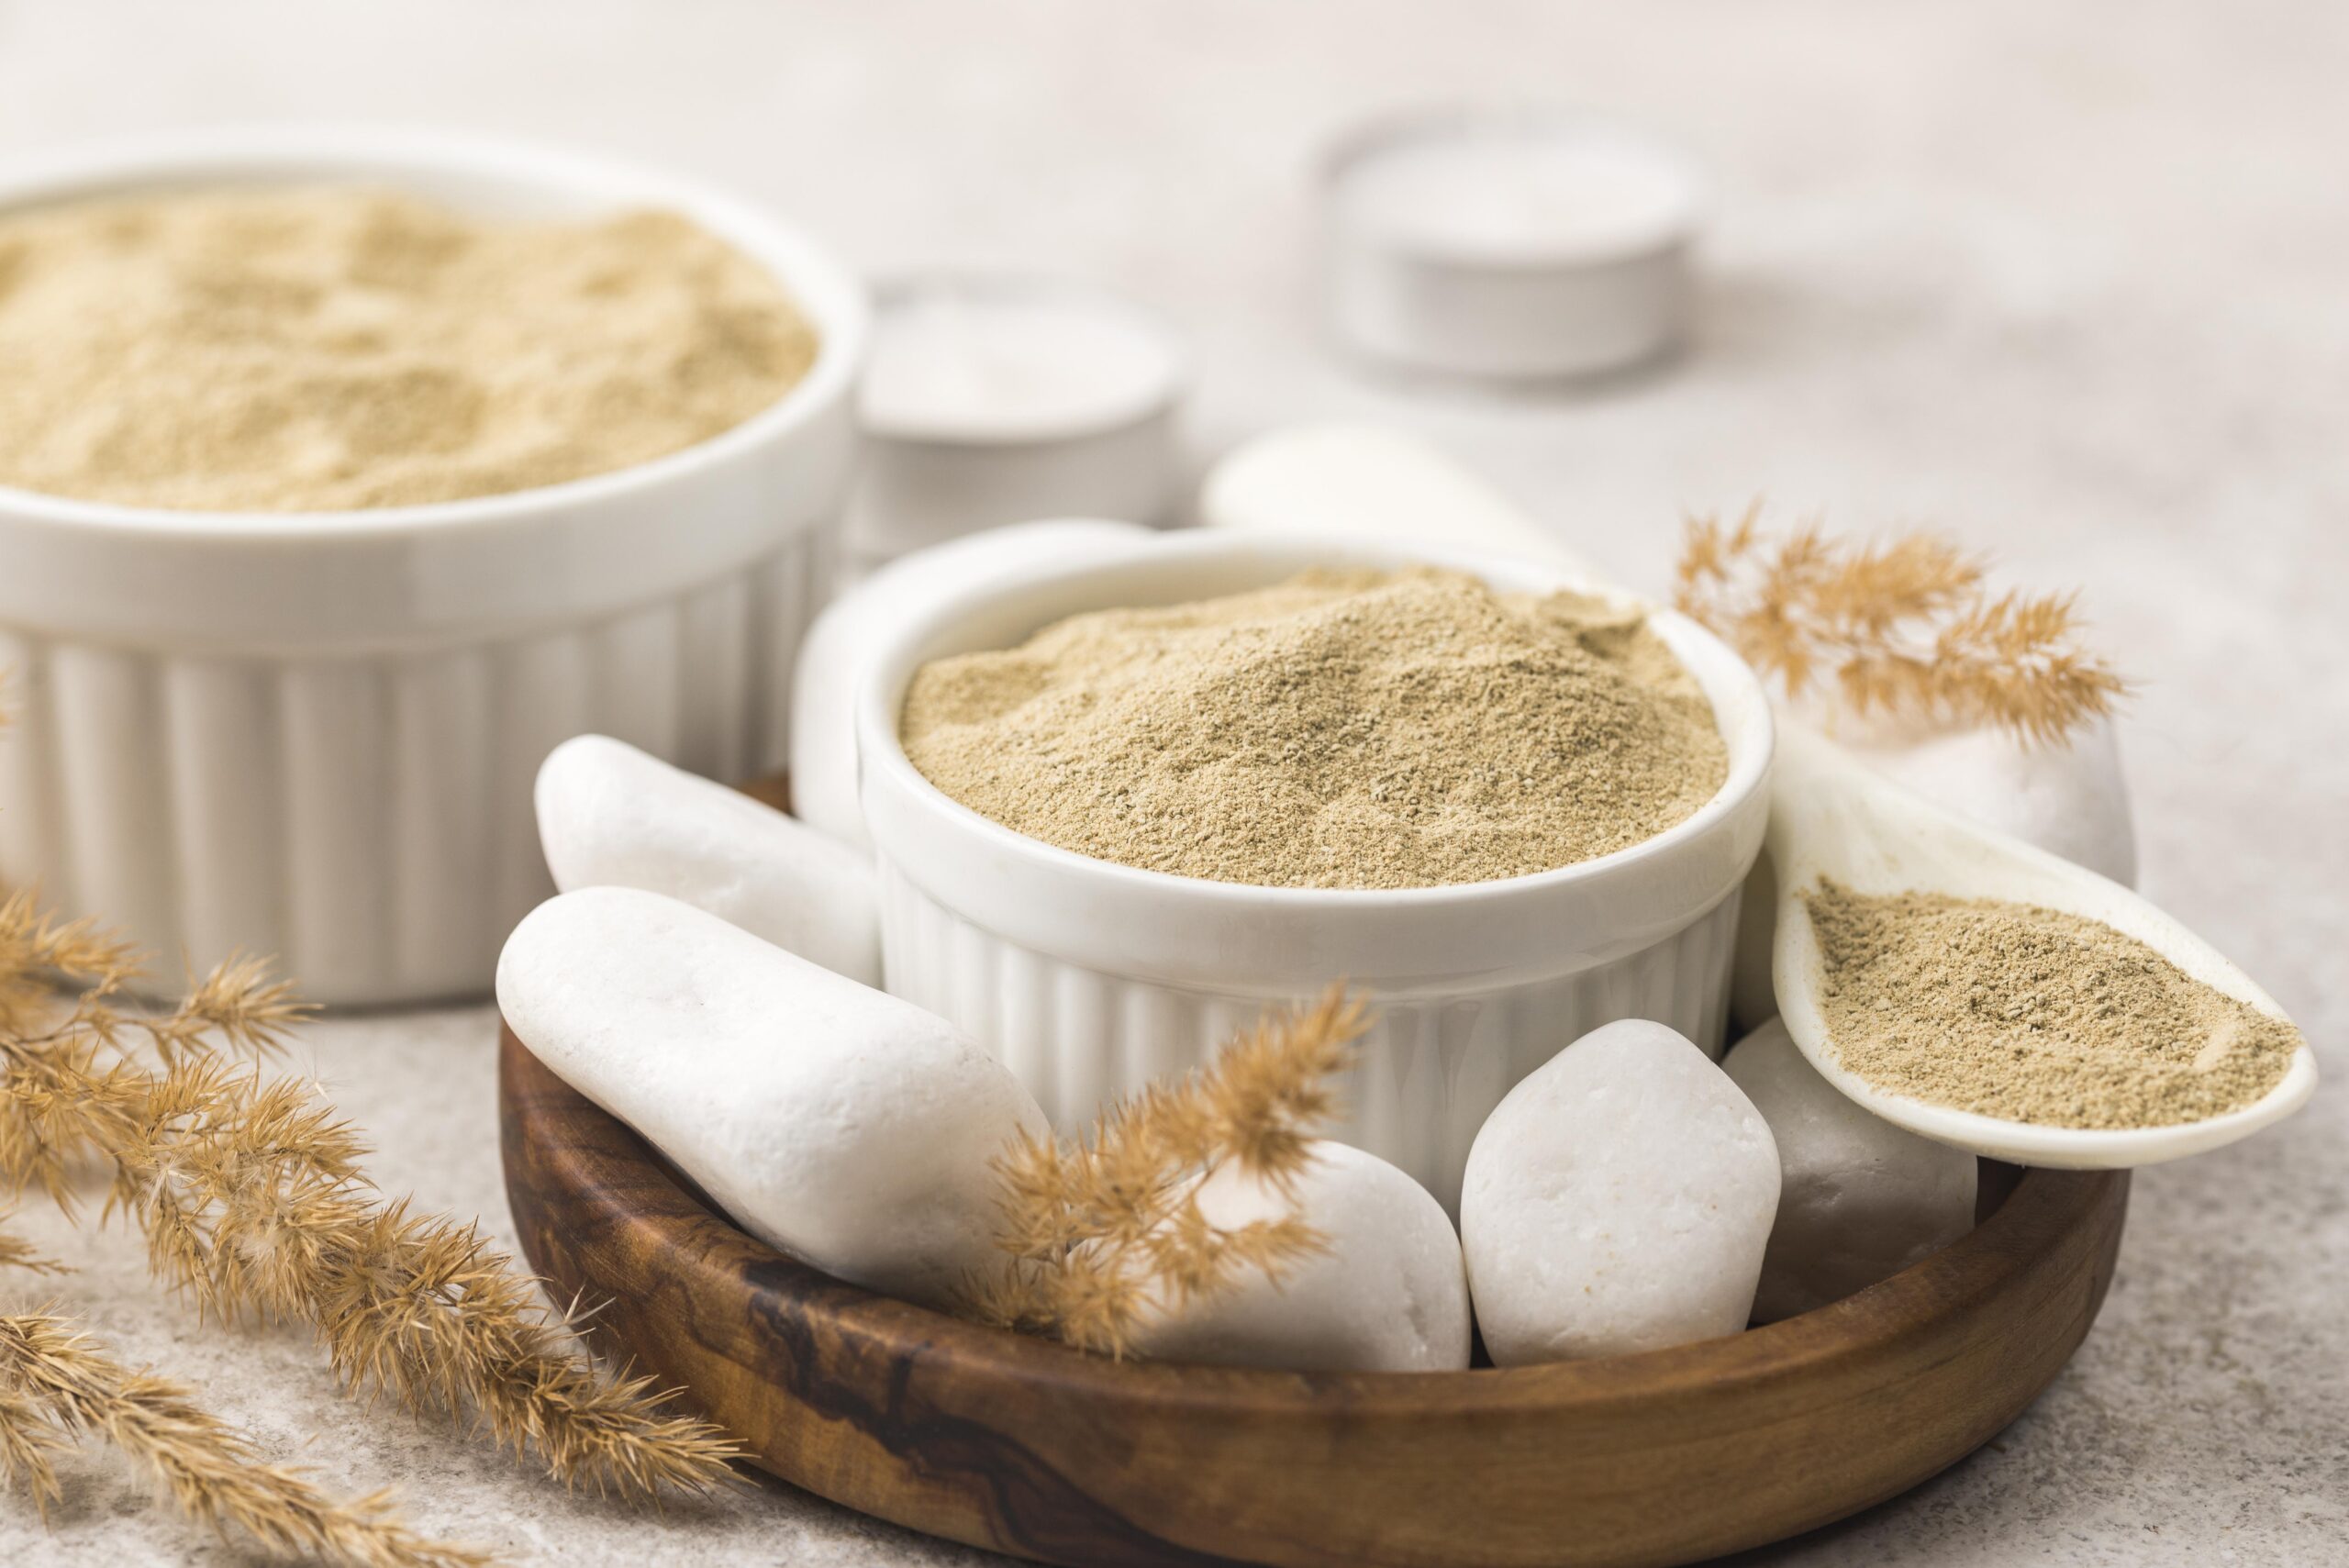 Protein powder: How to use it effectively